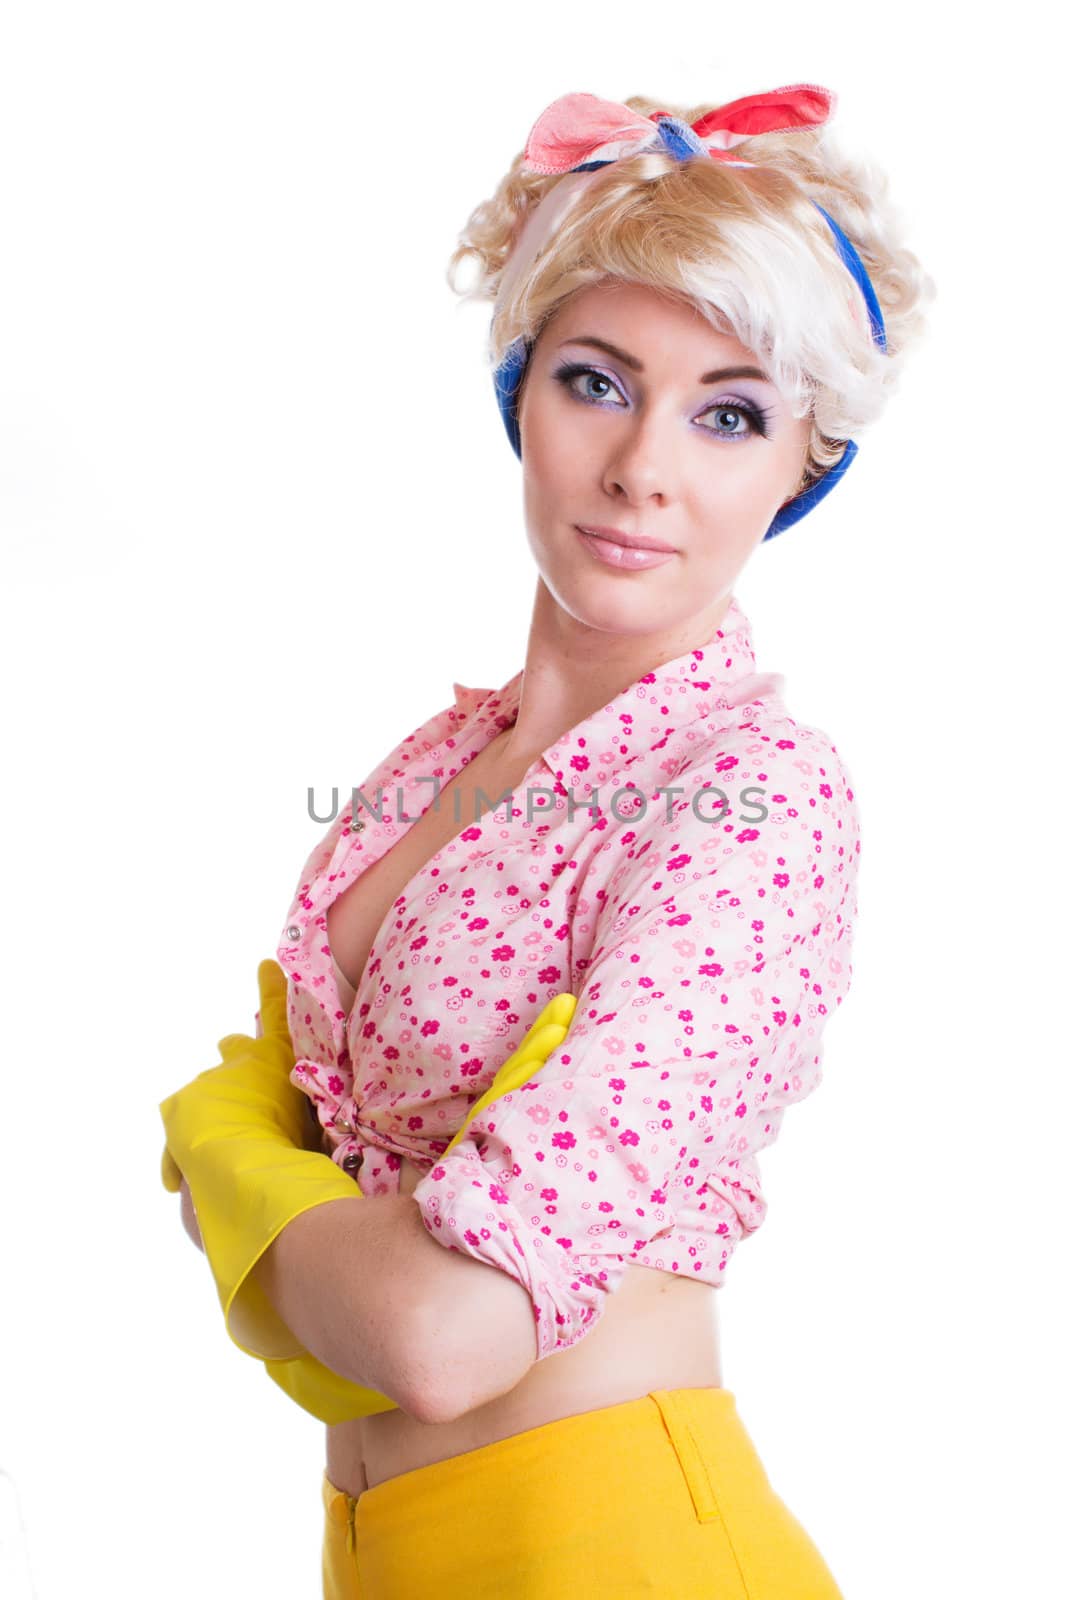 Pinup styled housewife in gloves over white